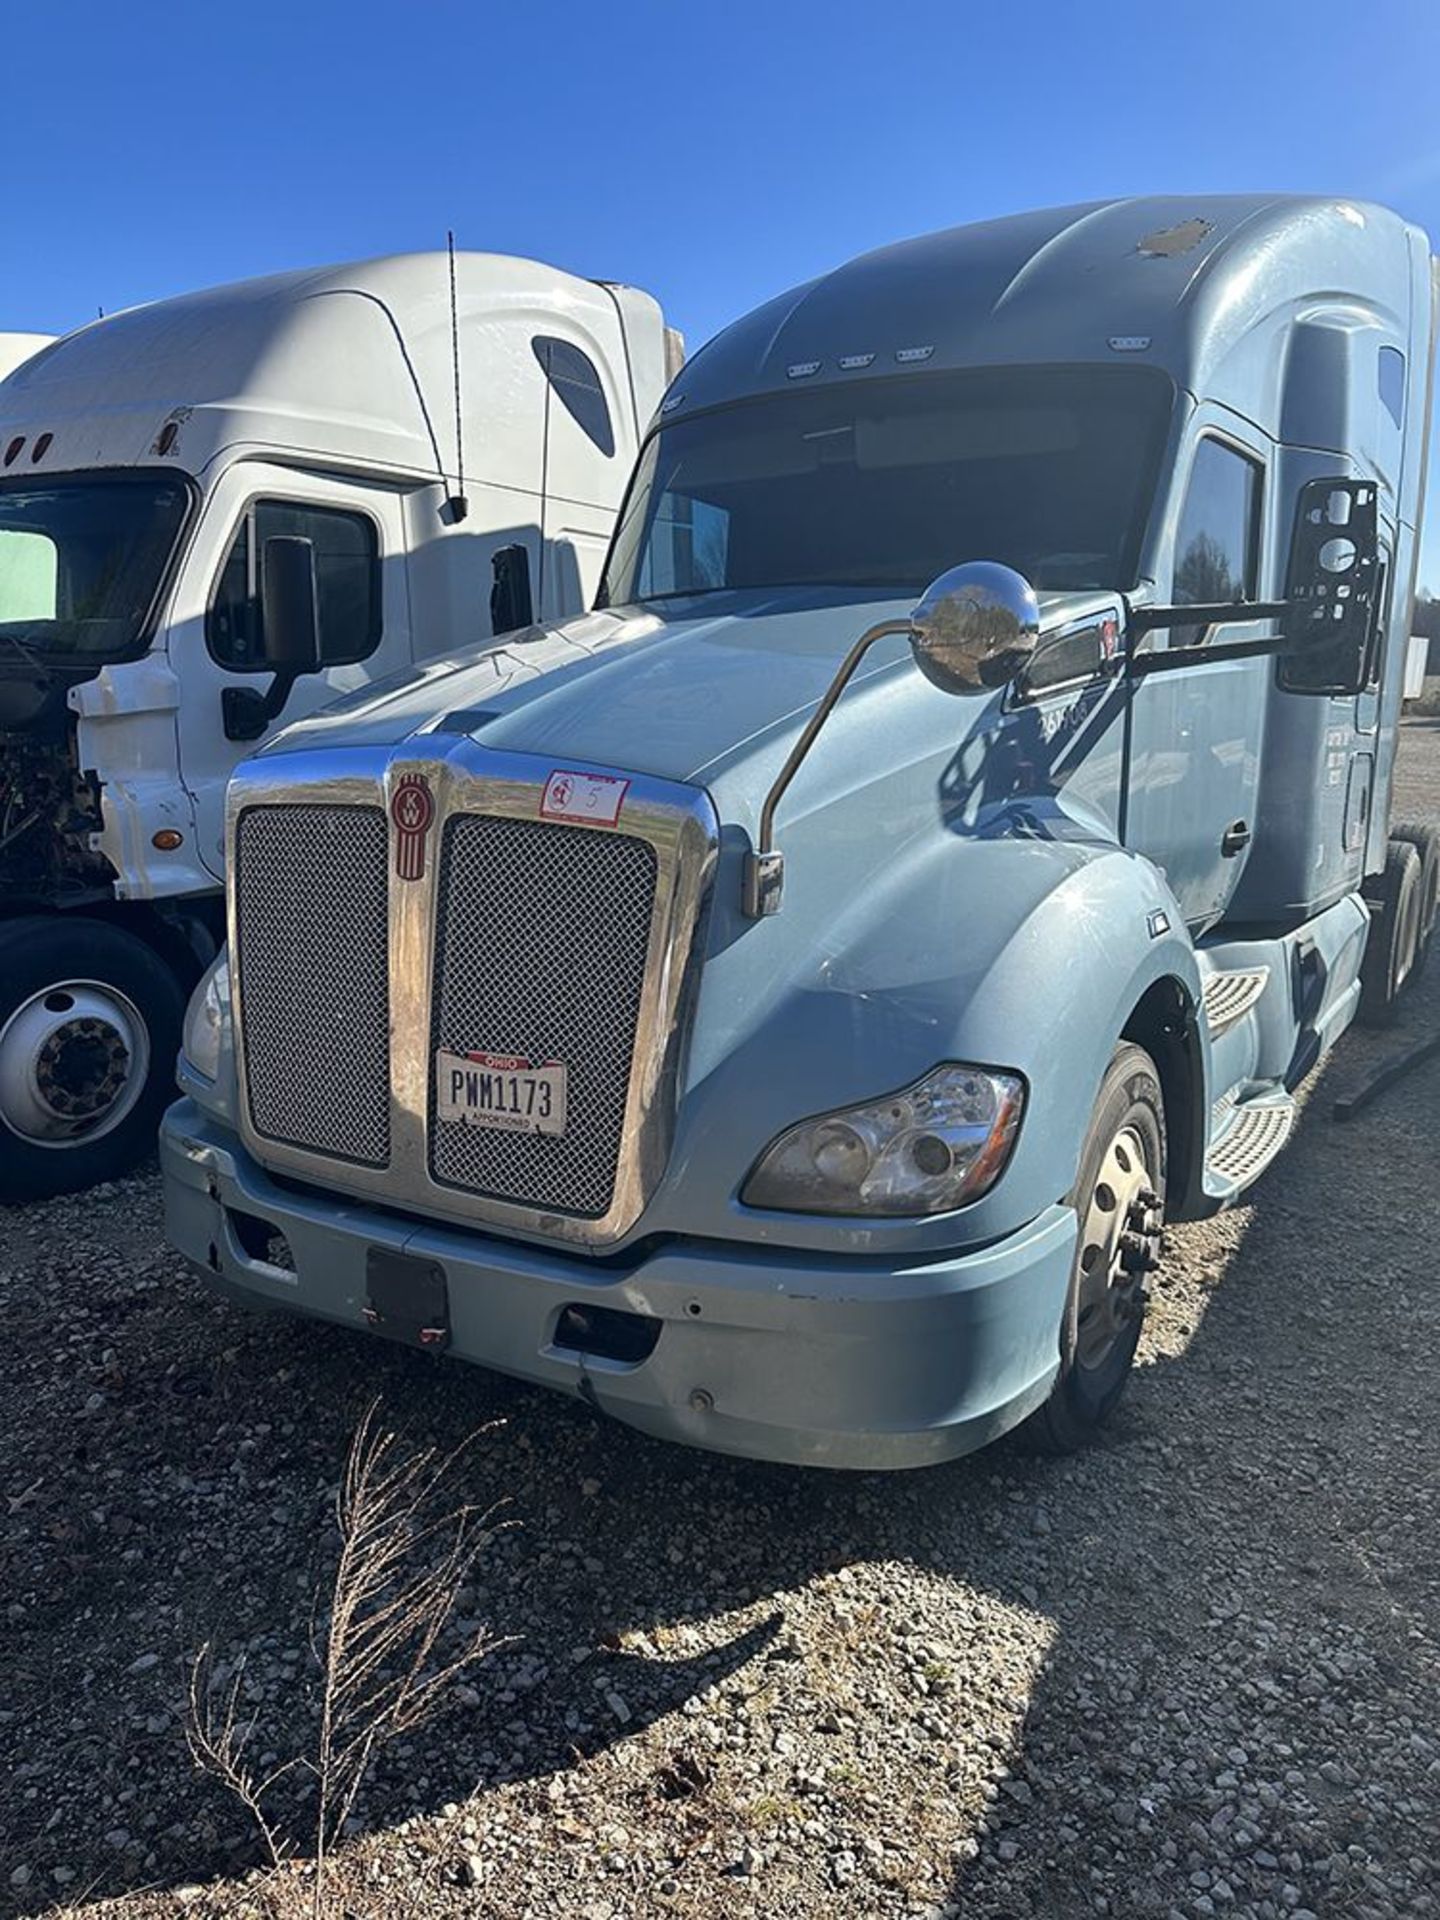 Kenworth T680 Truck Tractor, Sleeper Cab Condo Type (Light Blue), With 450-HP Cummins ISX15 Diesel - Image 2 of 13